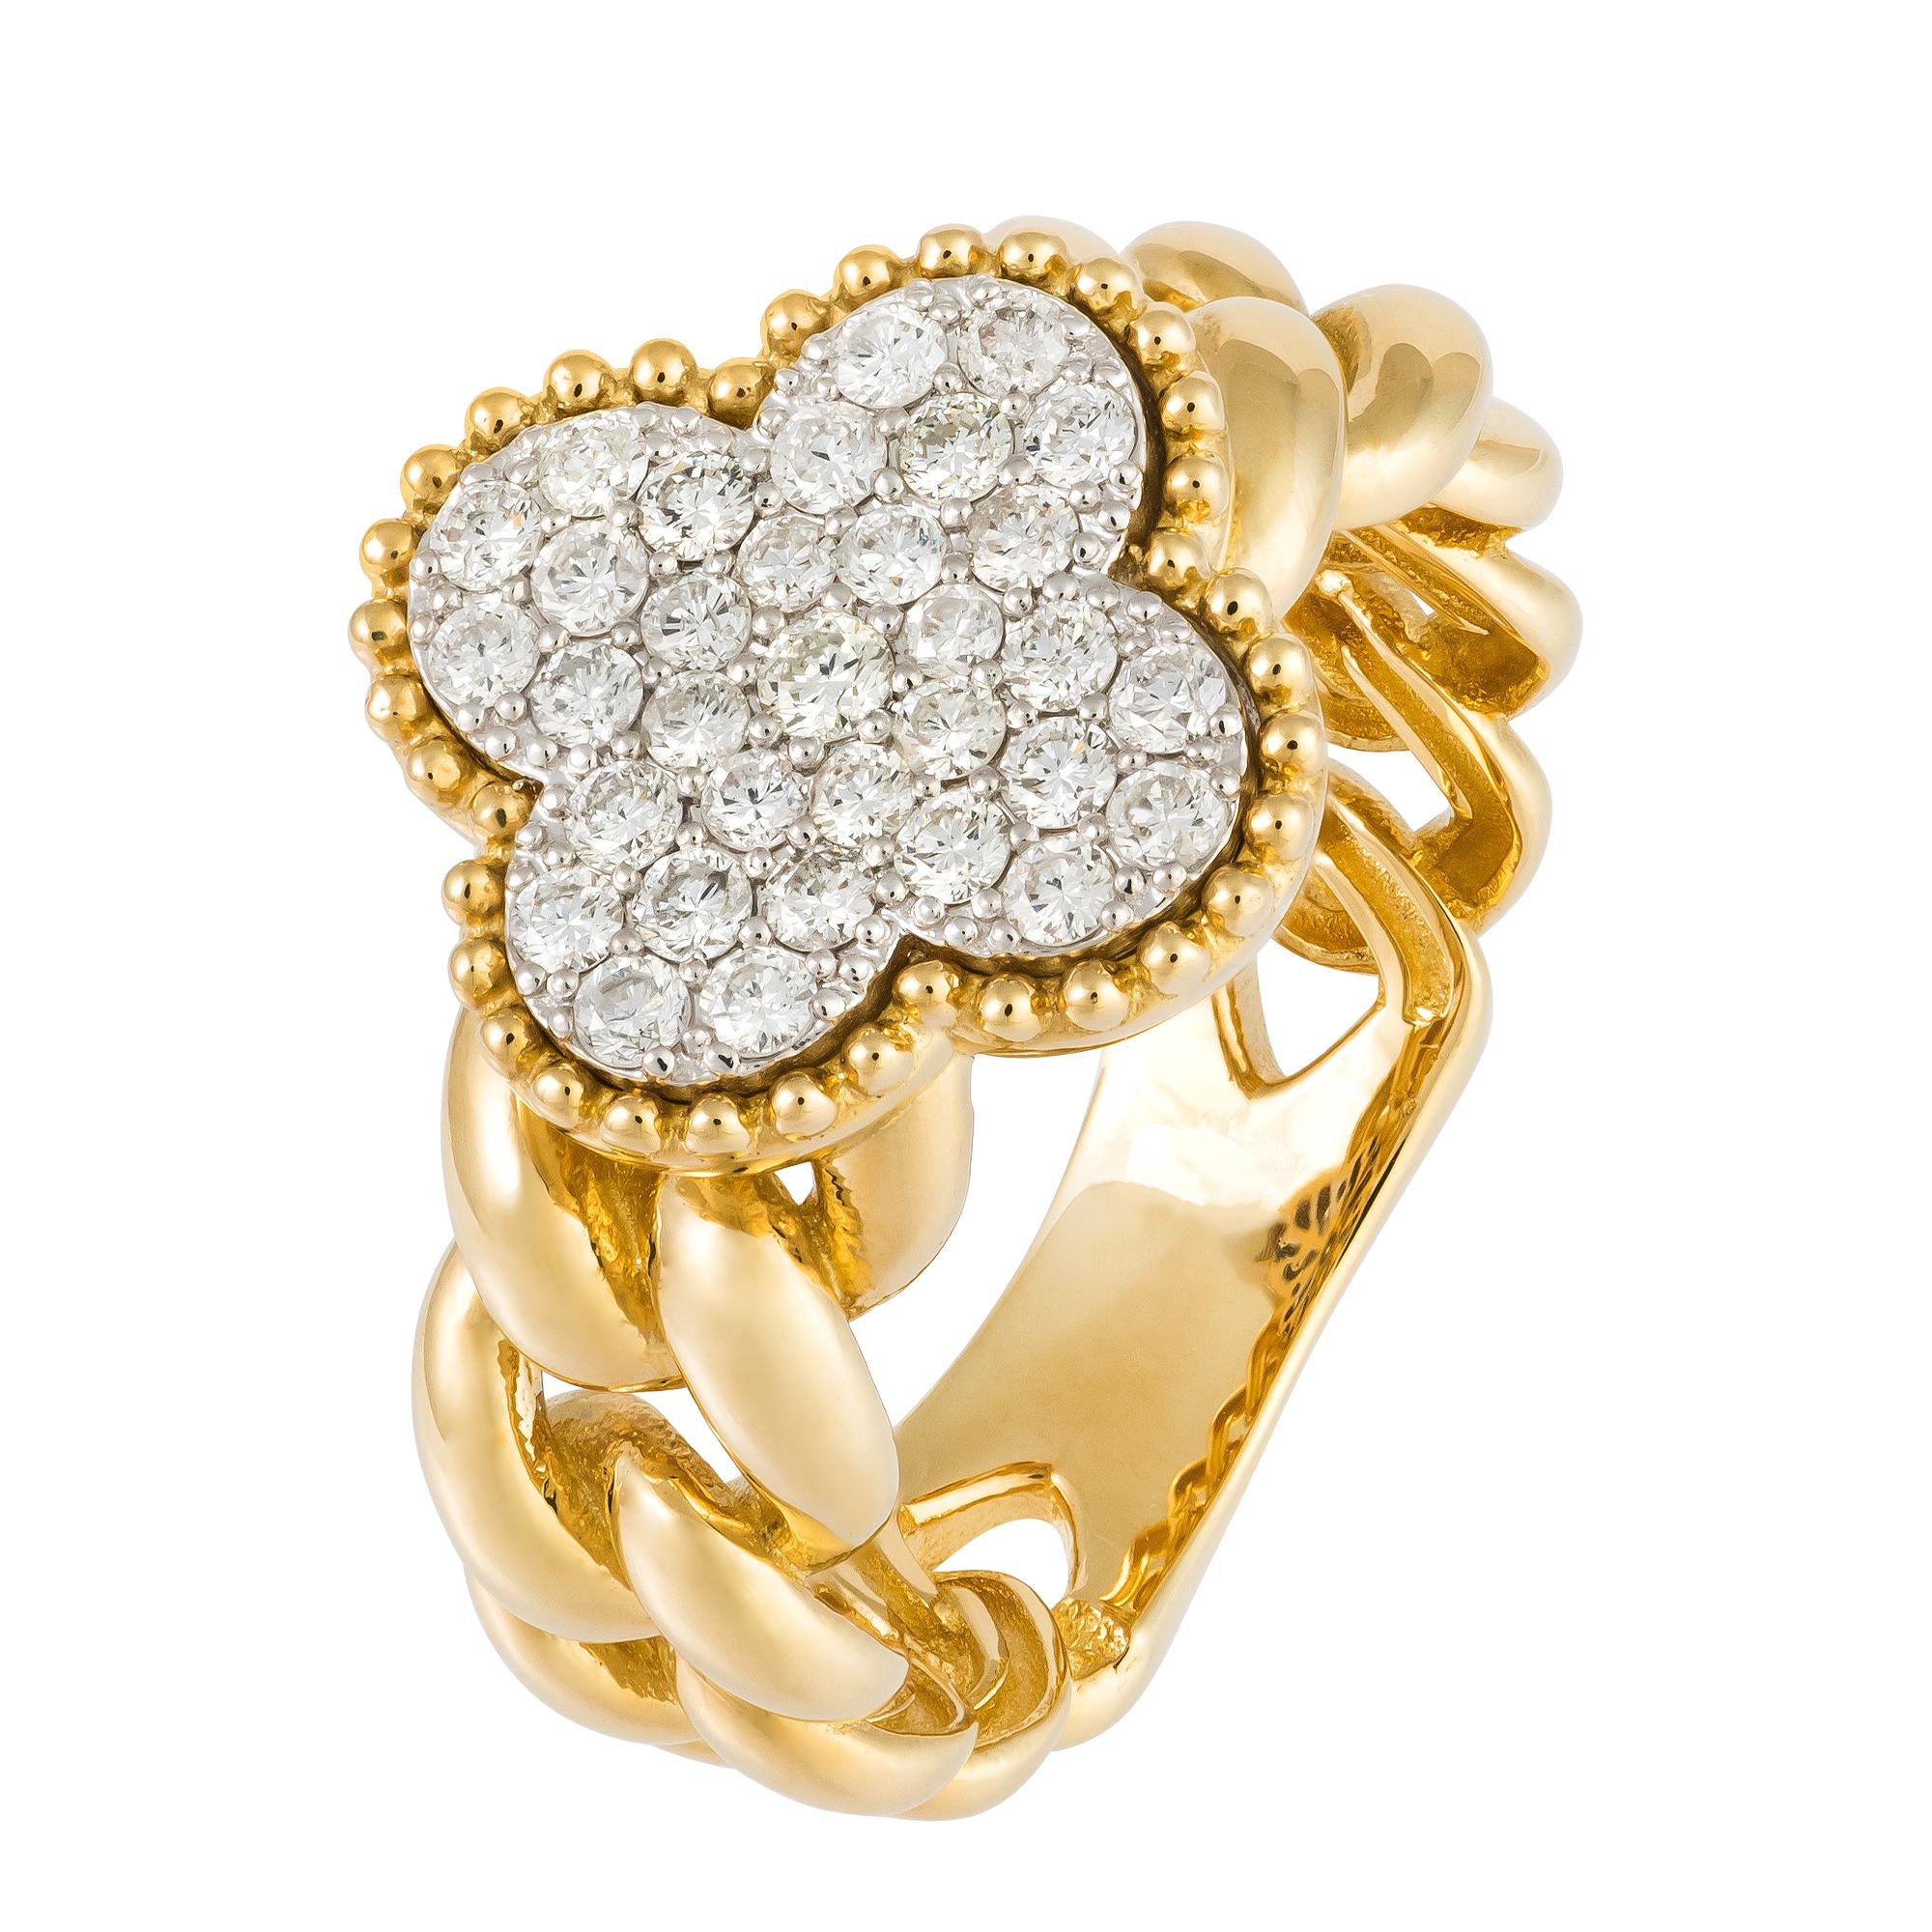 For Sale:  Stunning Yellow 18K Gold White Diamond Ring For Her 3